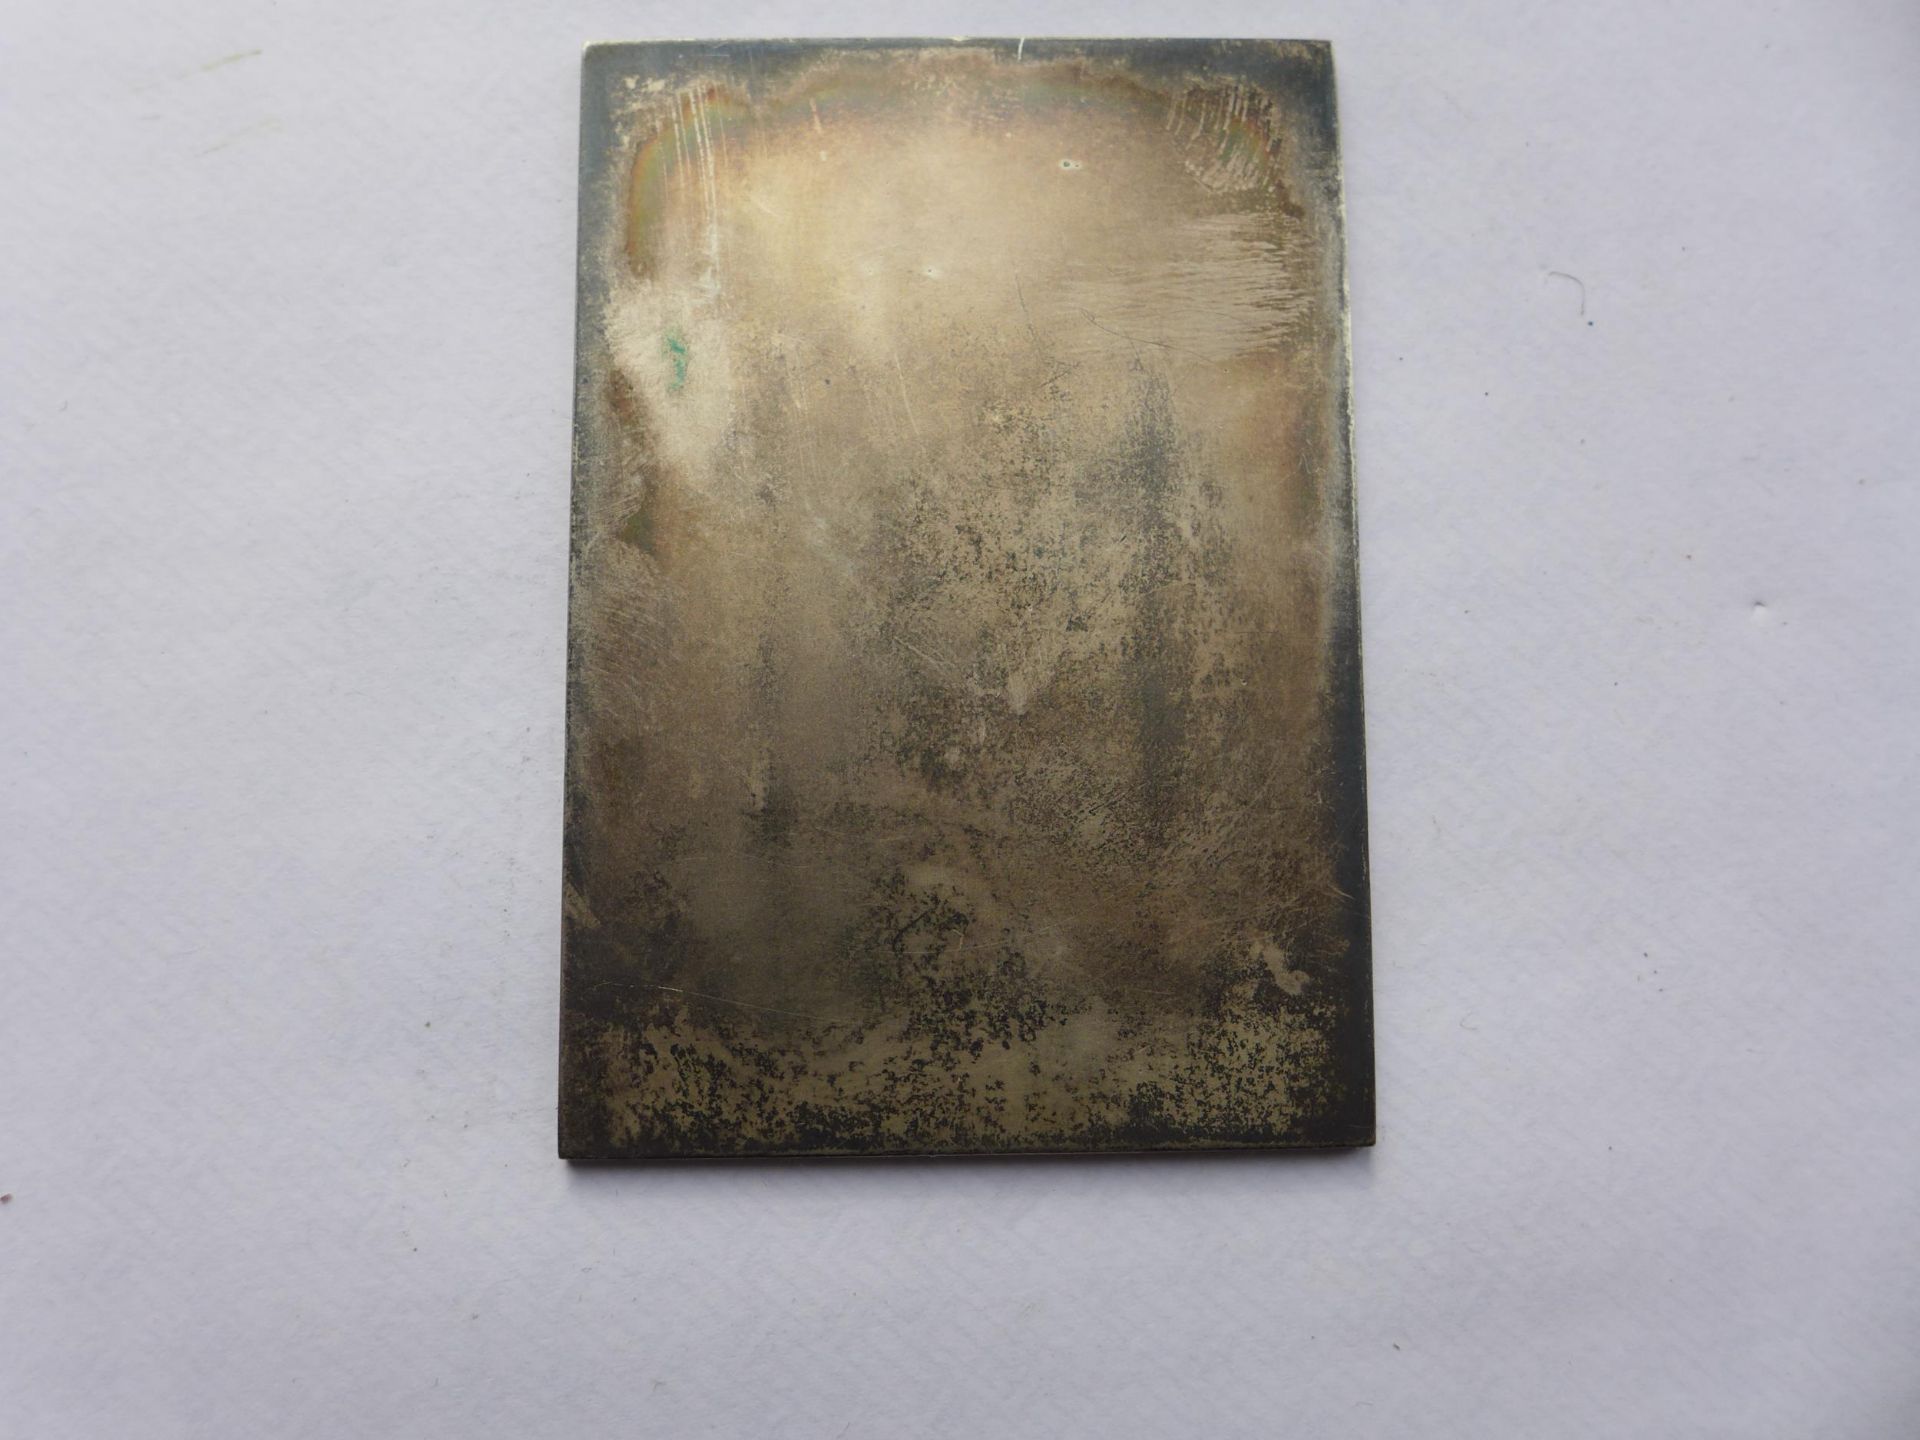 A CASED WHITE METAL EDUARDO HIRSCHBERG UNIFACE PLAQUE DATED 18TH MARCH 1919 BY F TROJANA, 72MM BY - Image 6 of 6